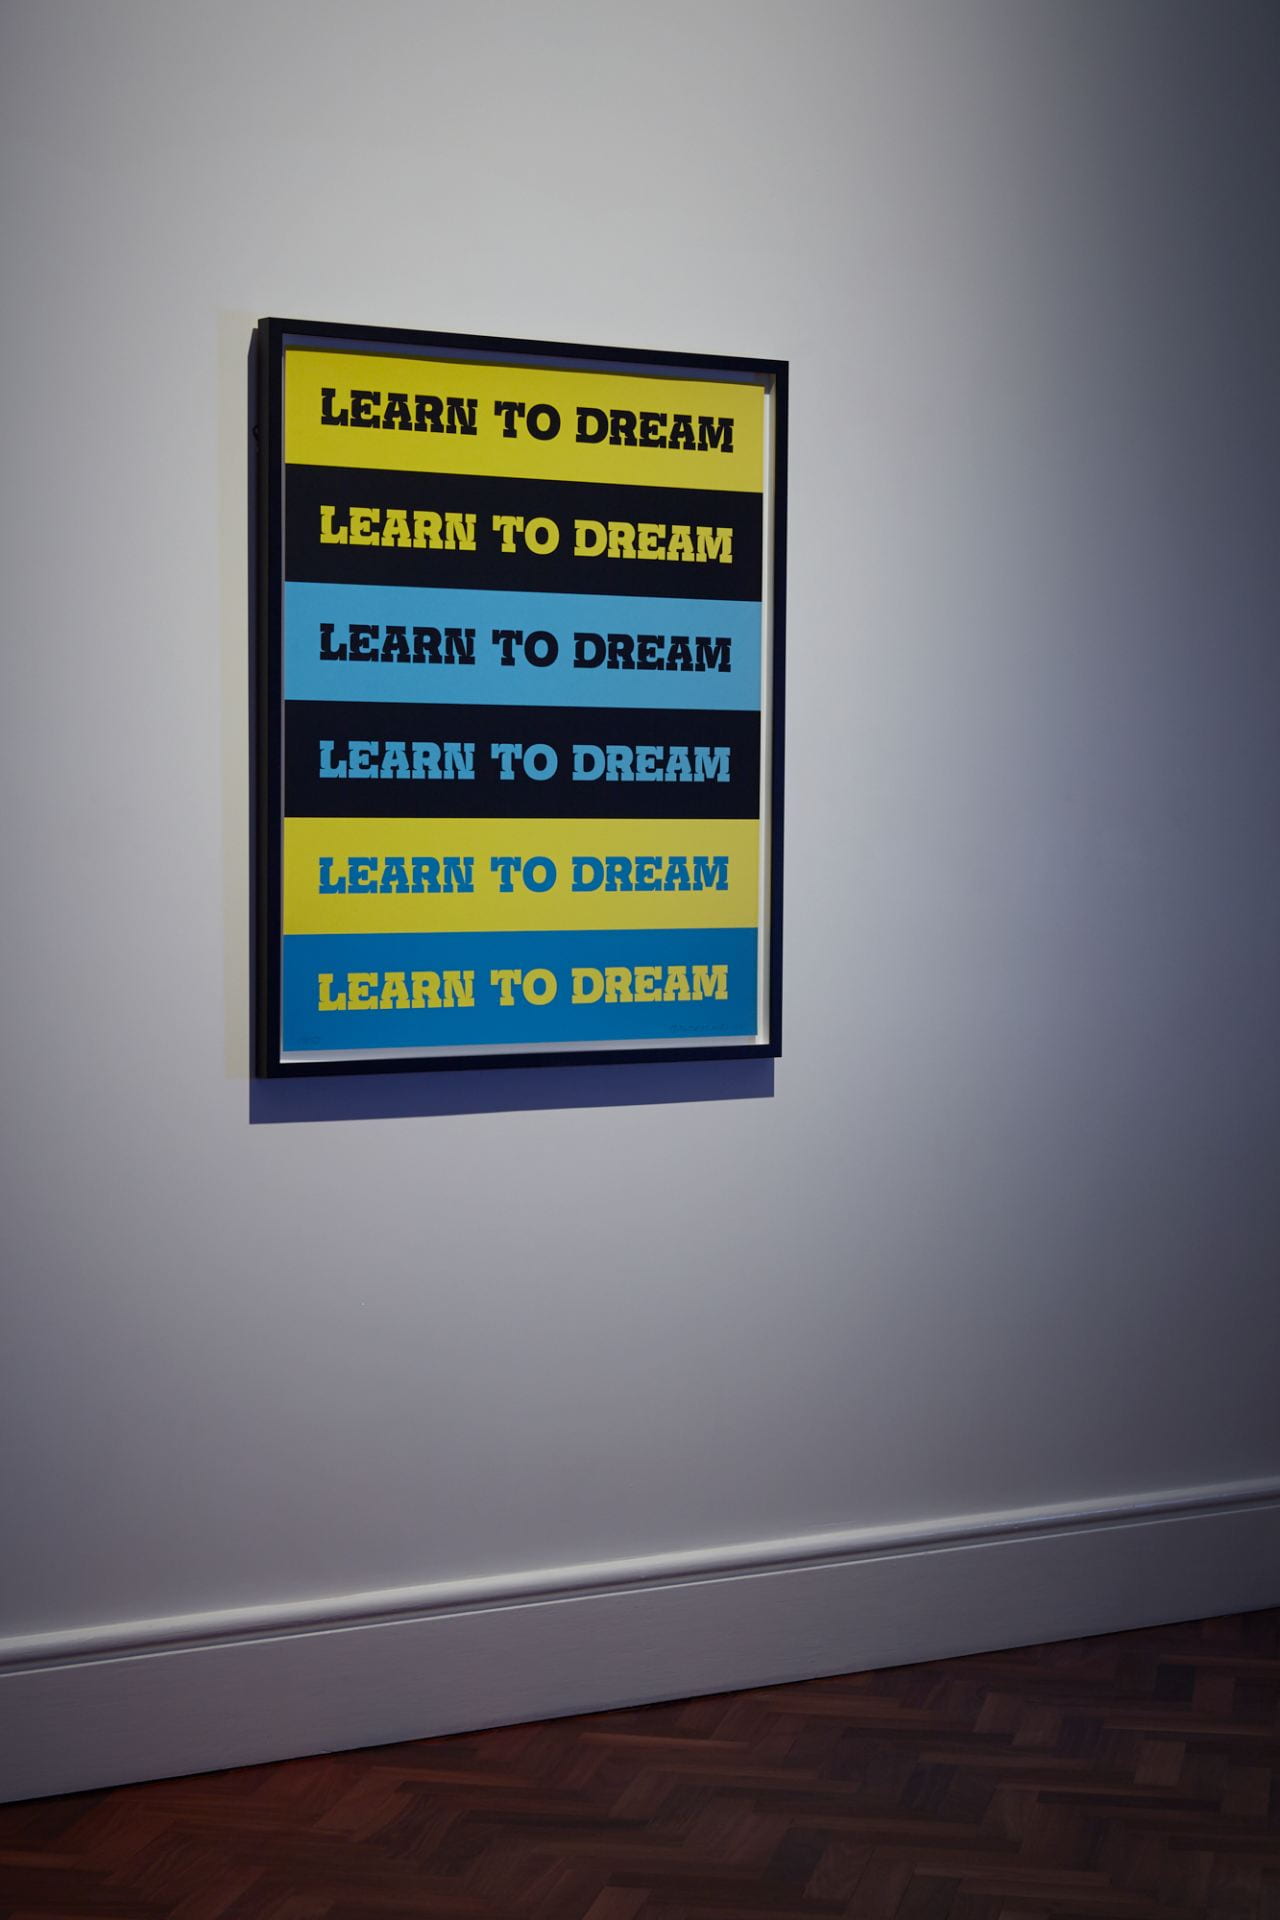 A framed artwork made up of yellow, black and blue horizontal stripes. Each stripe has the phrase "Learn to dream" written across it.